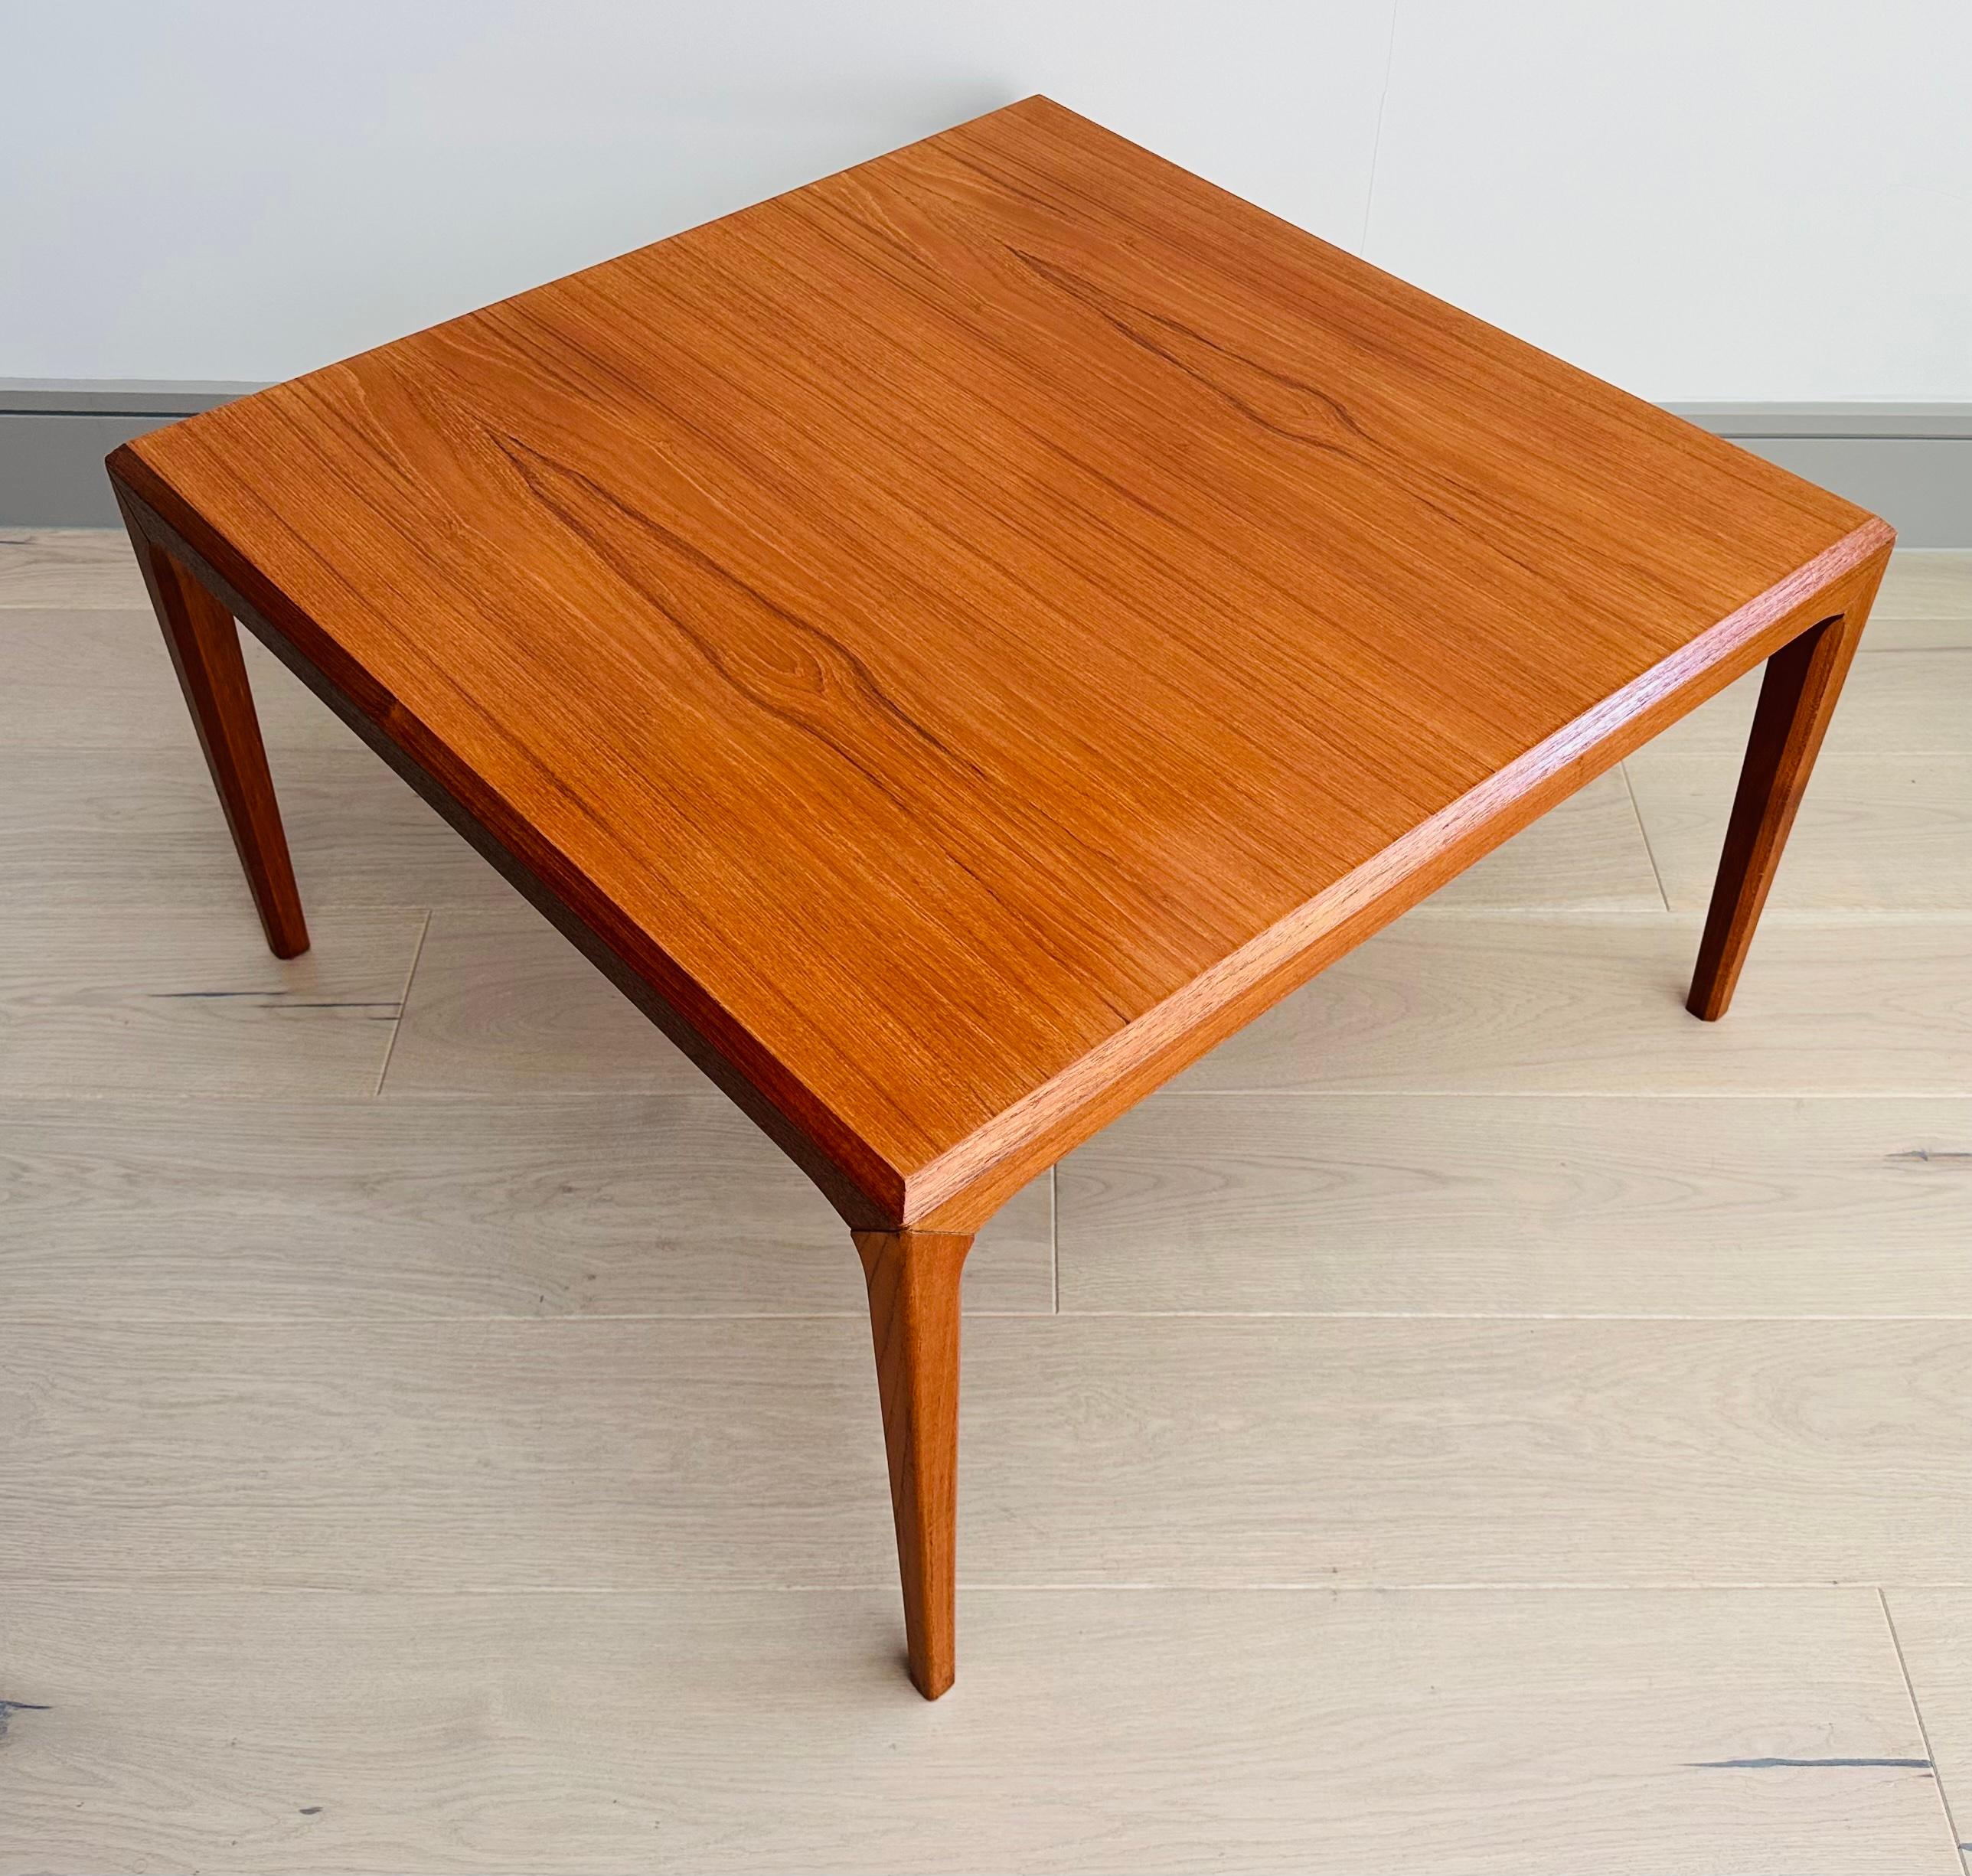 1960s Danish Silkeborg Furniture Square Teak Coffee Table by Johannes Andersen For Sale 2